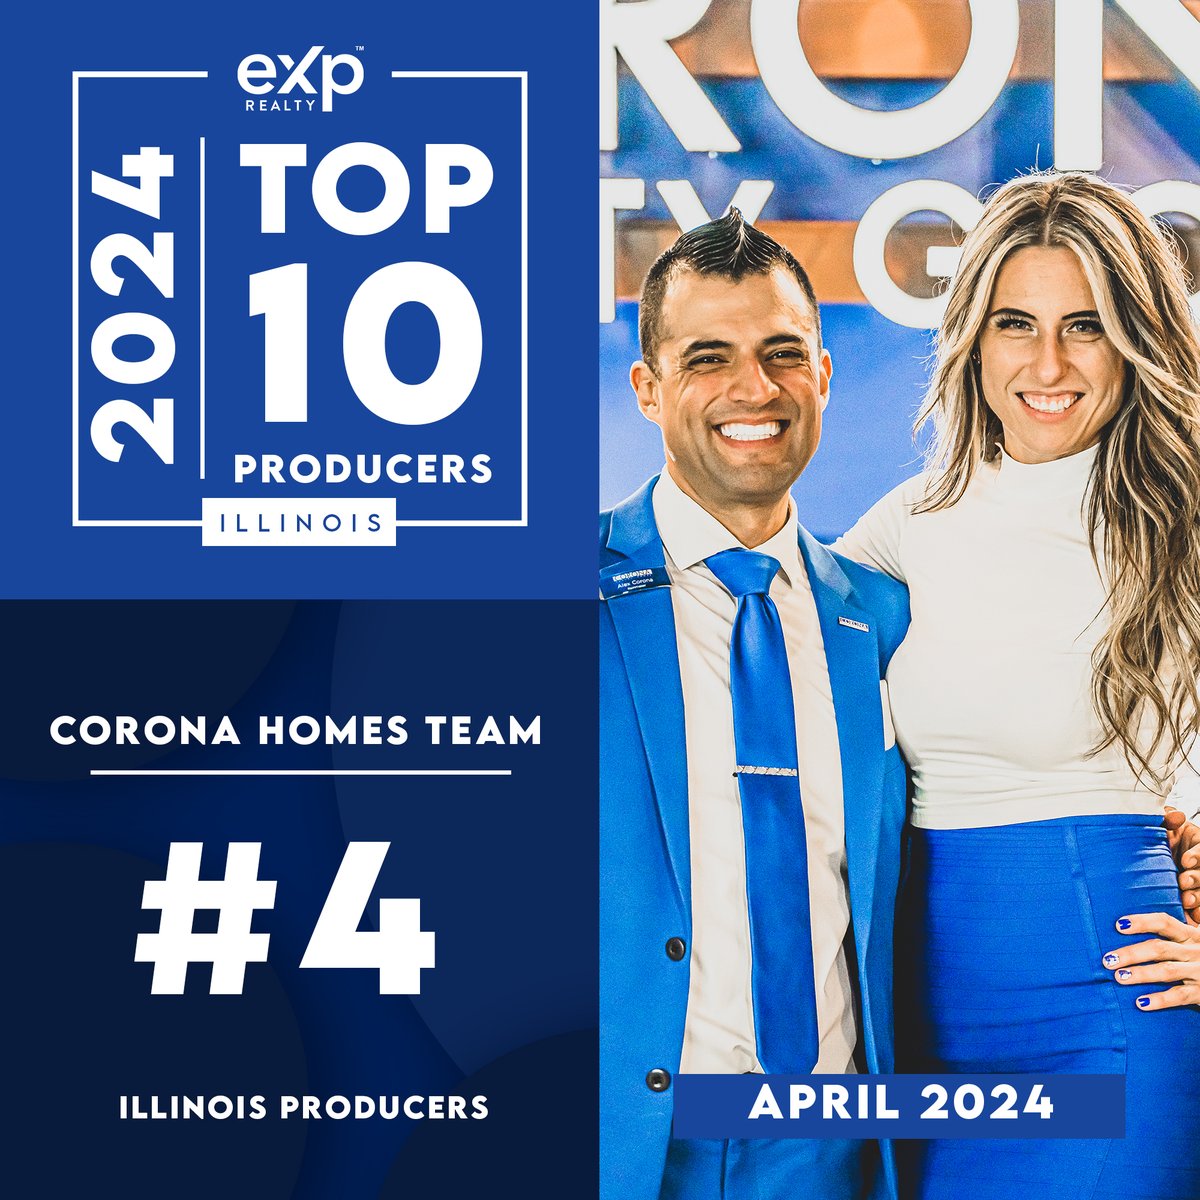 🎉 Excited to announce the Corona Homes Team ranked #4 among Top Producers in Illinois for April 2024! 🏡 Thanks to our amazing clients and partners for your support. Here's to more success! #Exprealty #TopProducers #IllinoisRealEstate #CoronaHomesTeam #Chicago #CoronaSharks